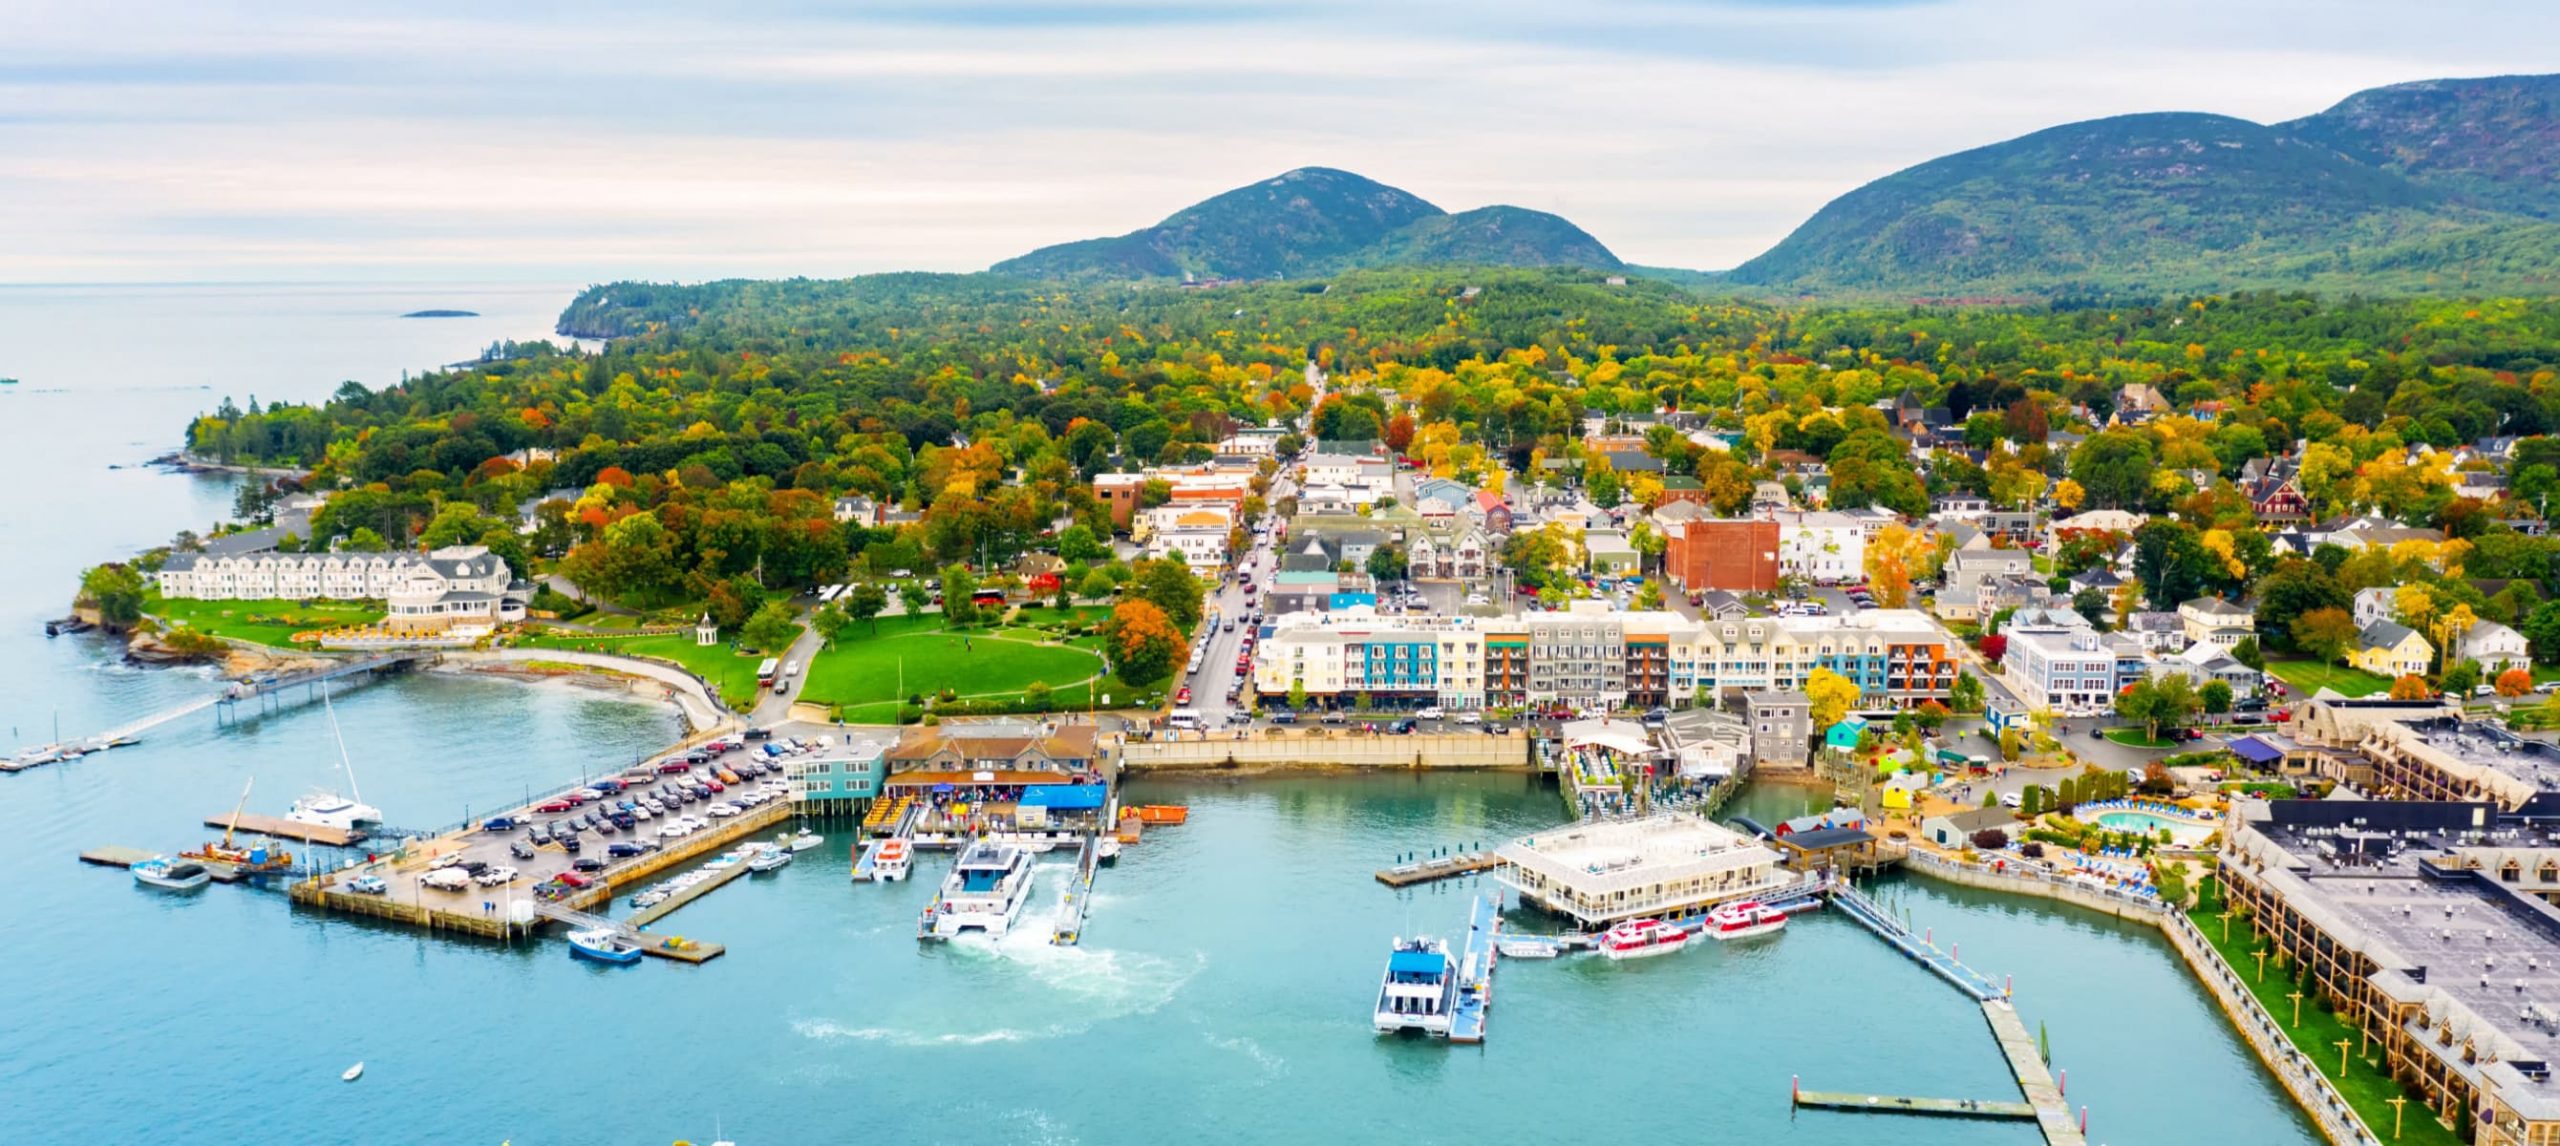 a view of Bar Harbor, Maine